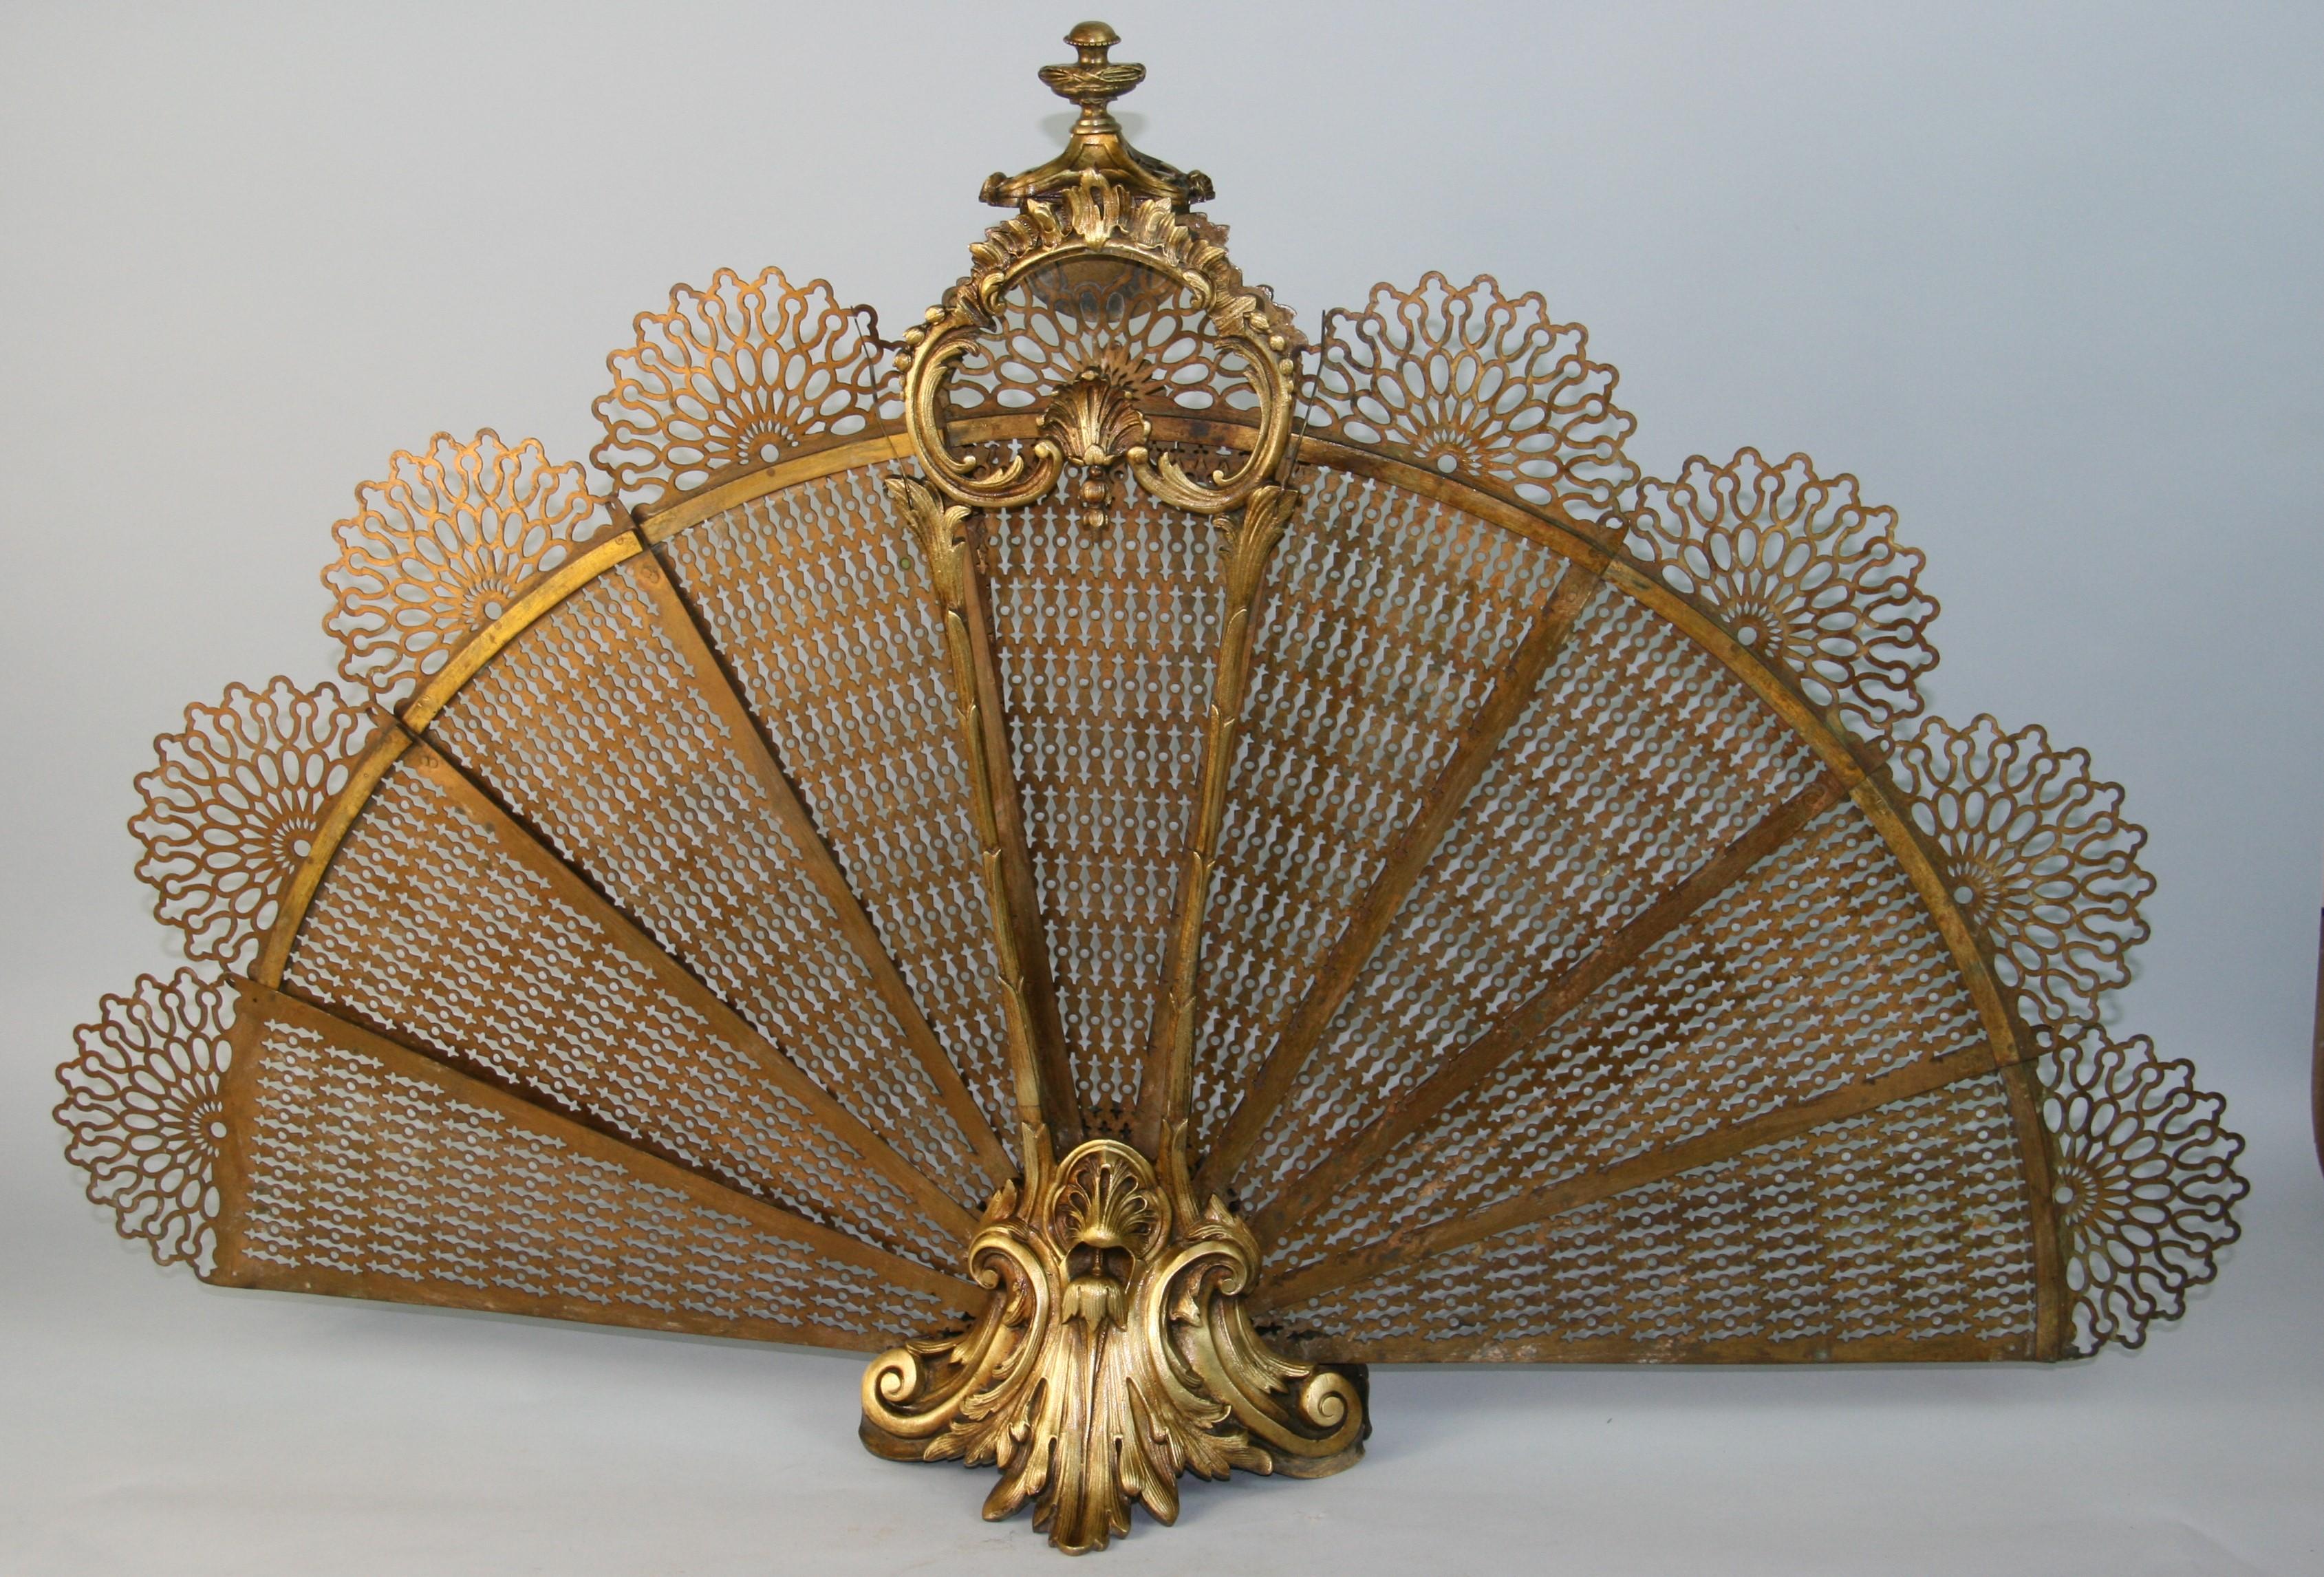 1380 French  brass pierced gallery urn finial acanthus foliage folding fire place fan screewith decorative centered cat tail and shell motif late 19 Century. 
Open dimensions 25.5 x 40 x 9.5